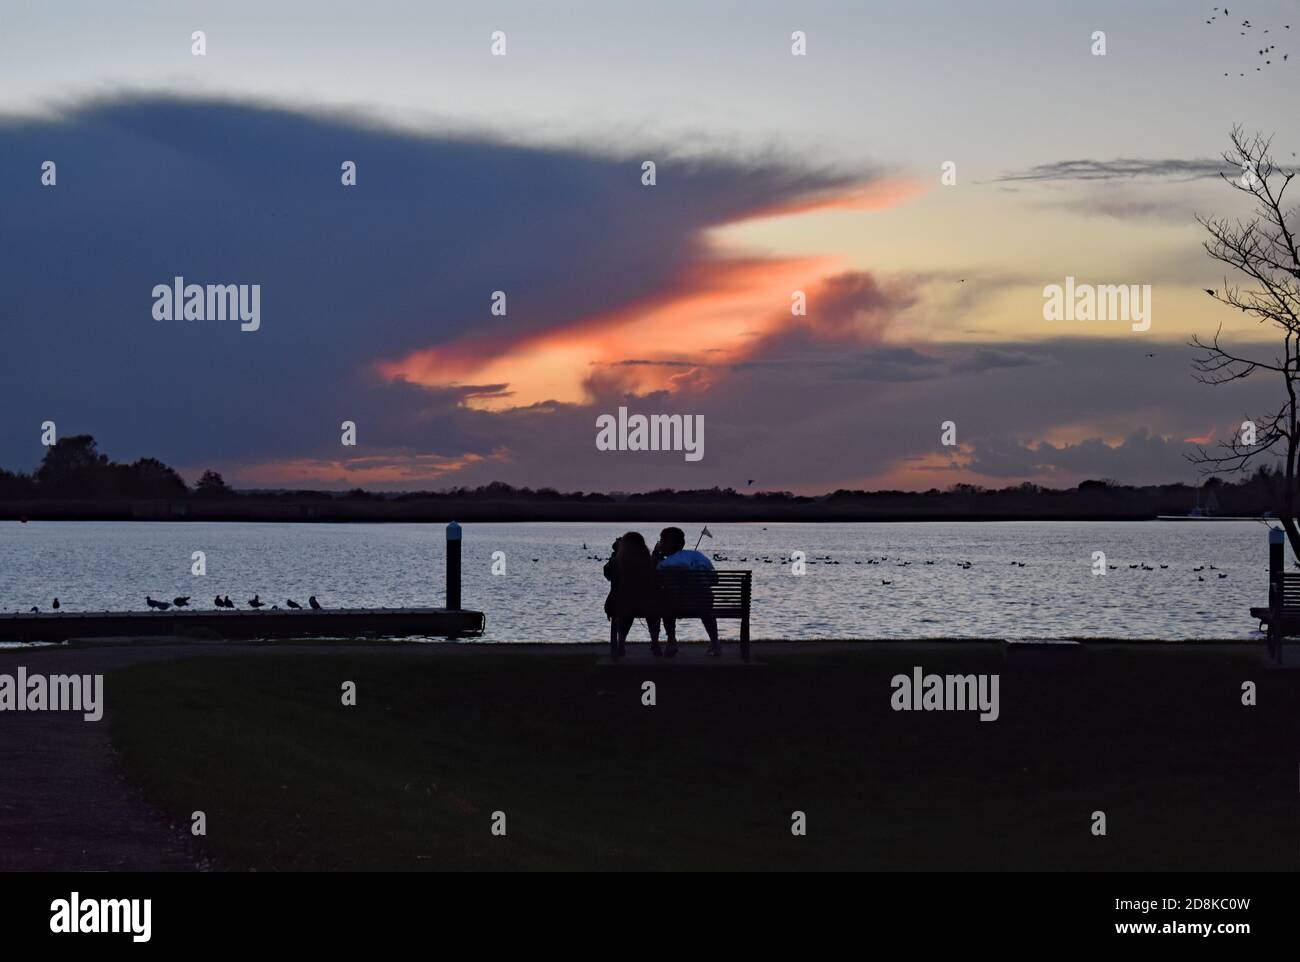 A couple sit on a bench watching the sunset at Oulton Broad near Lowestoft in The Broads National Park.  The clouds create a dramatic pattern. Stock Photo